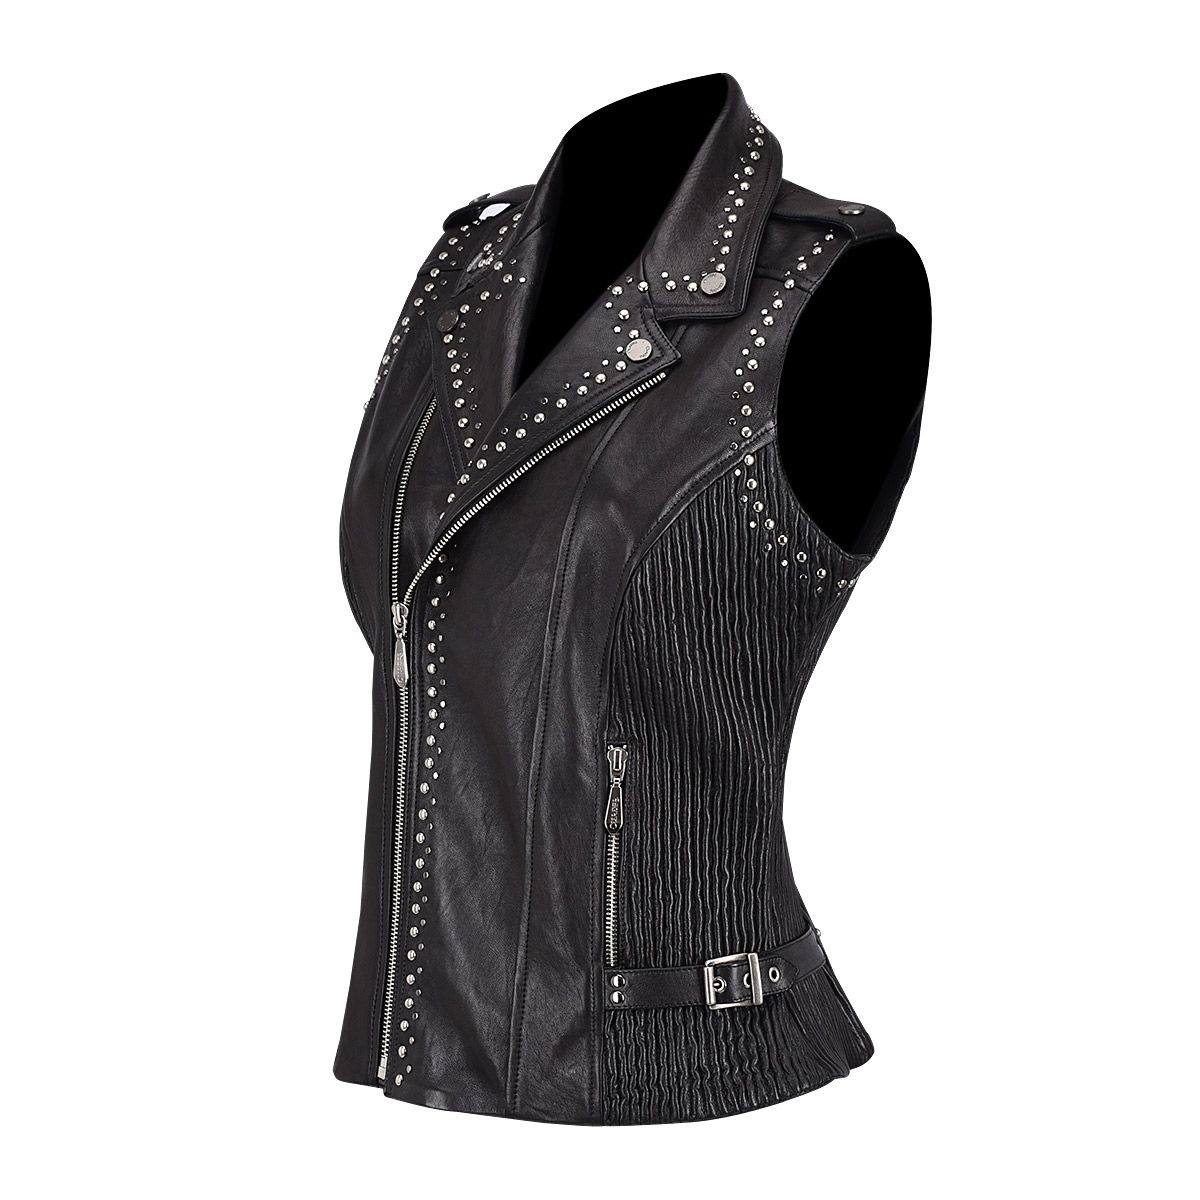 Cuadra black western fashion cowhide leather vest for women with studs –